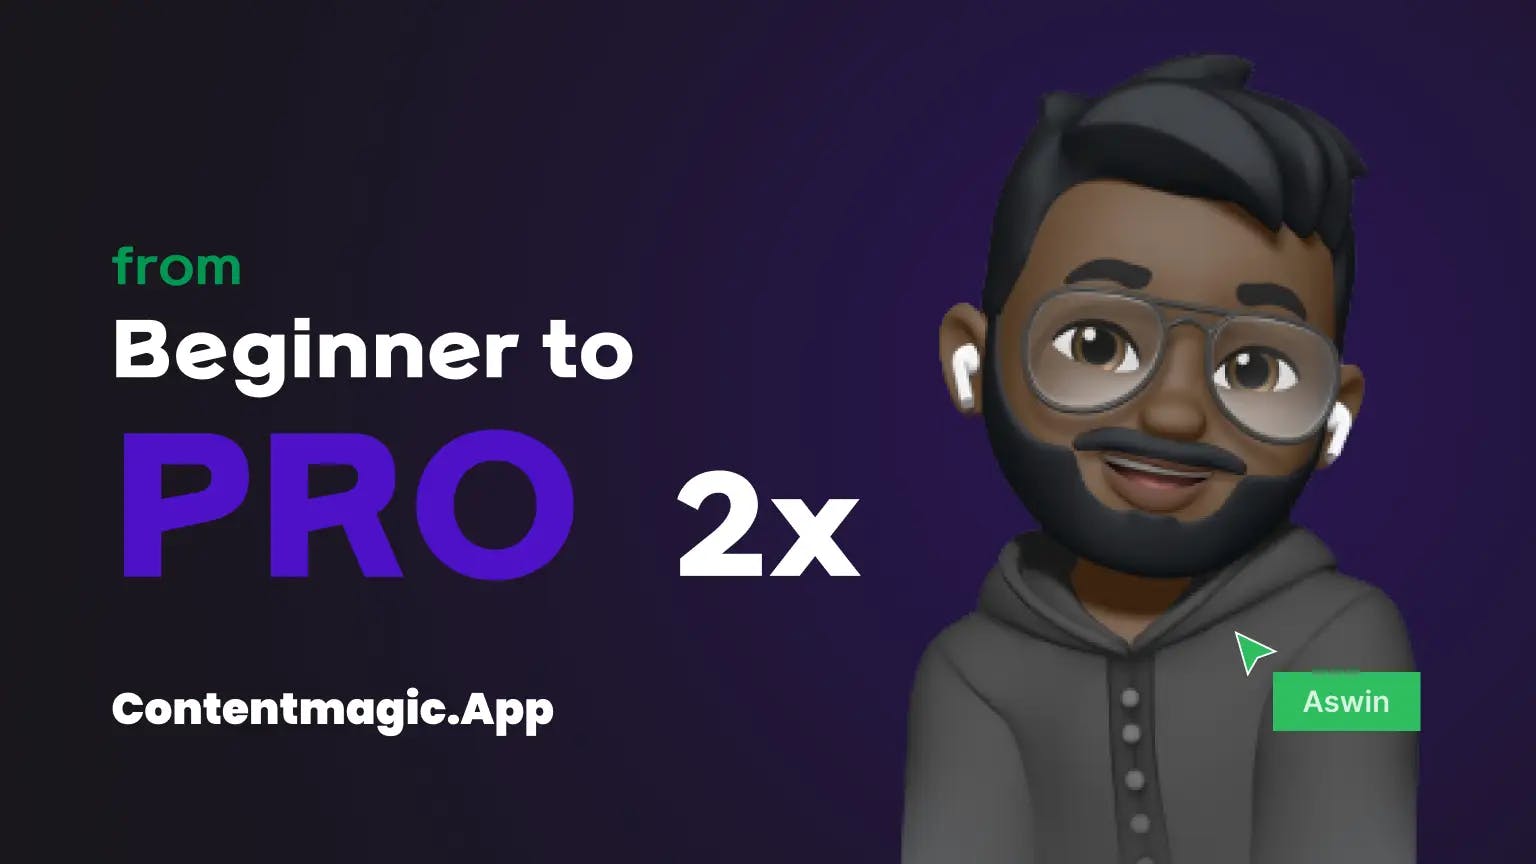 From Beginner to Pro: How Aswin Leveled Up with Content Magic